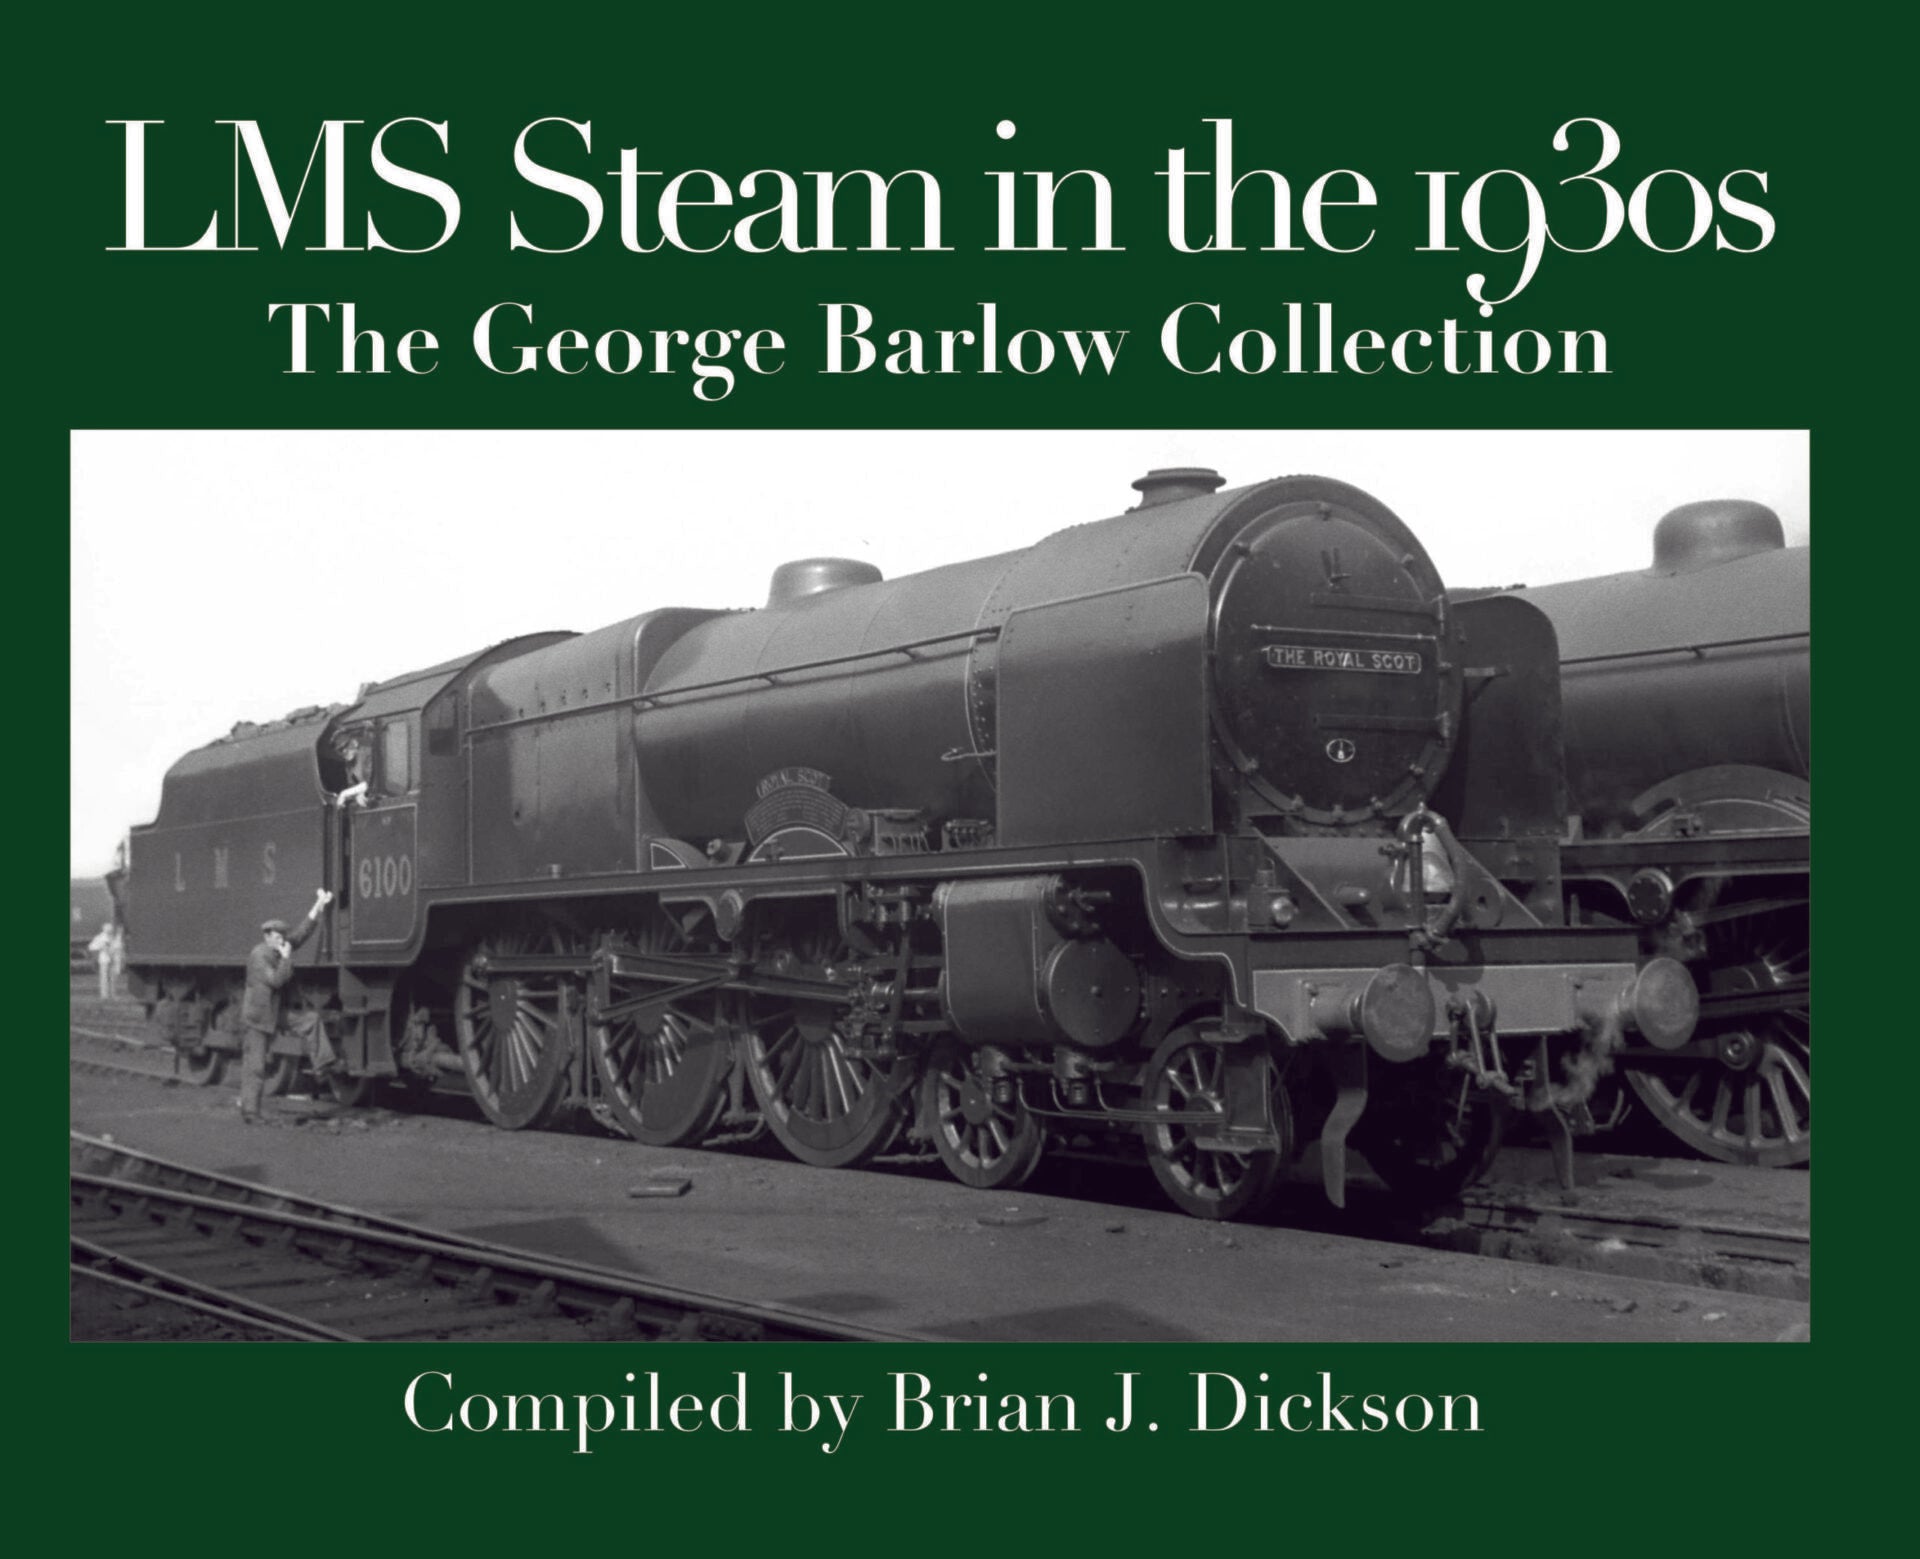 LMS STEAM IN THE 1930s